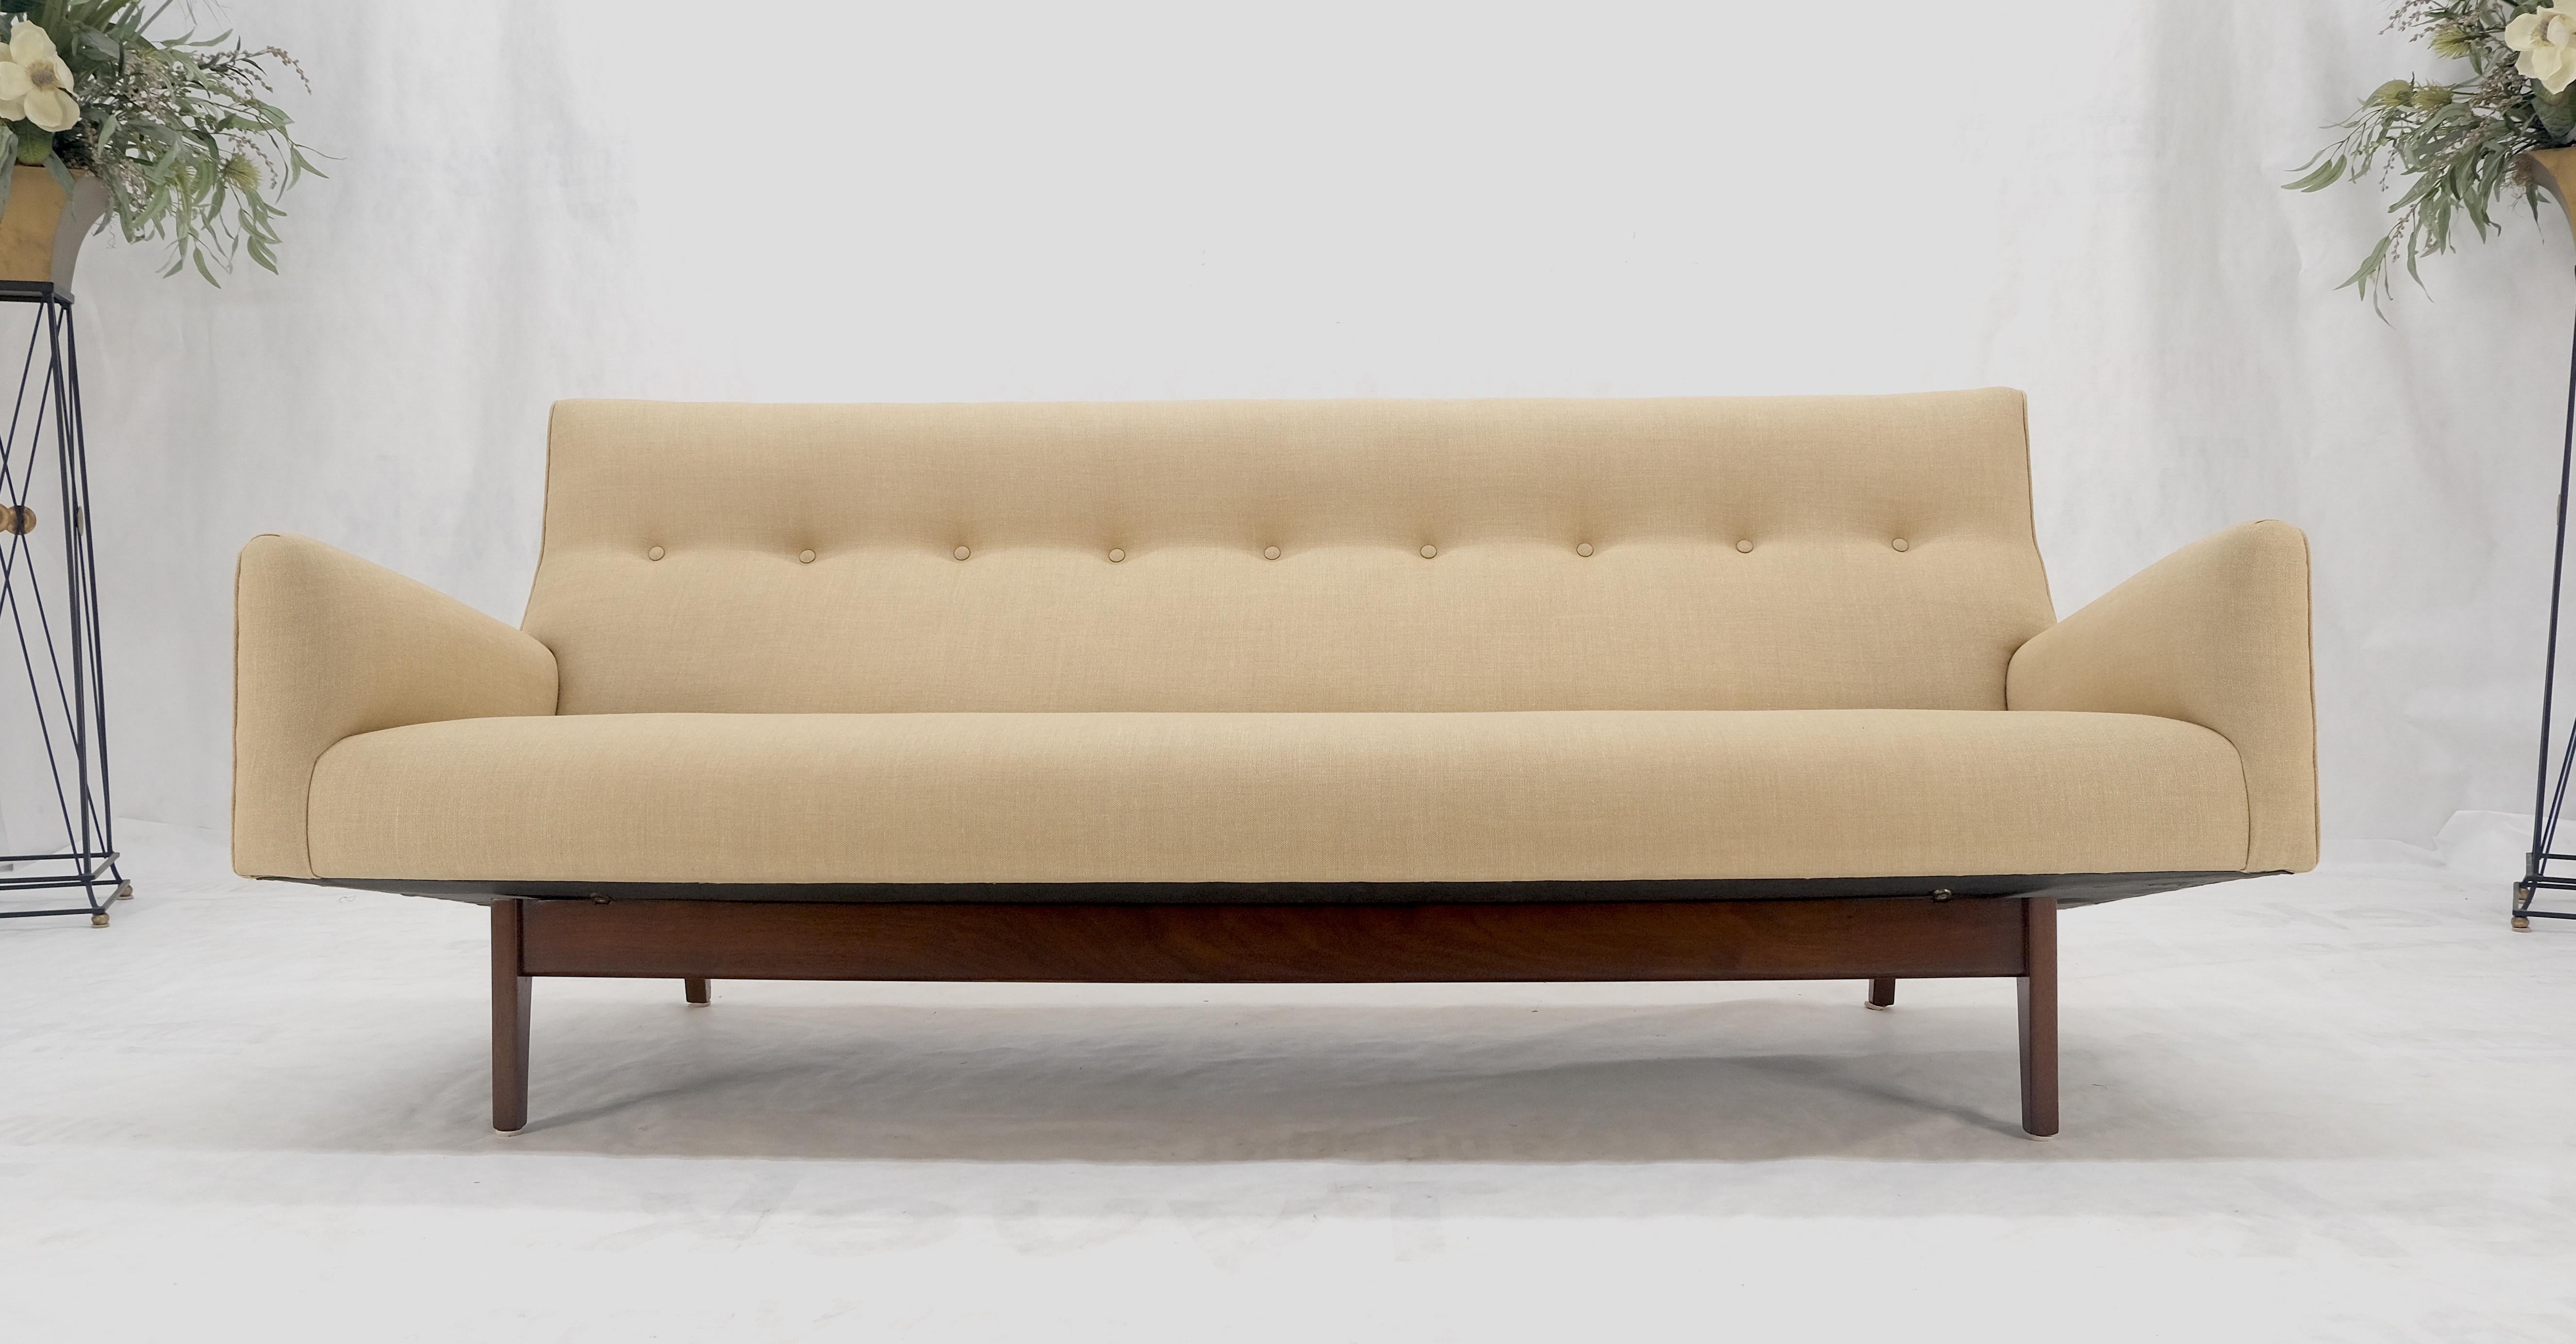 Jens Risom NEW Beige Linen Upholstery Oiled Walnut Frame c1960s Sofa Couch MINT! For Sale 1